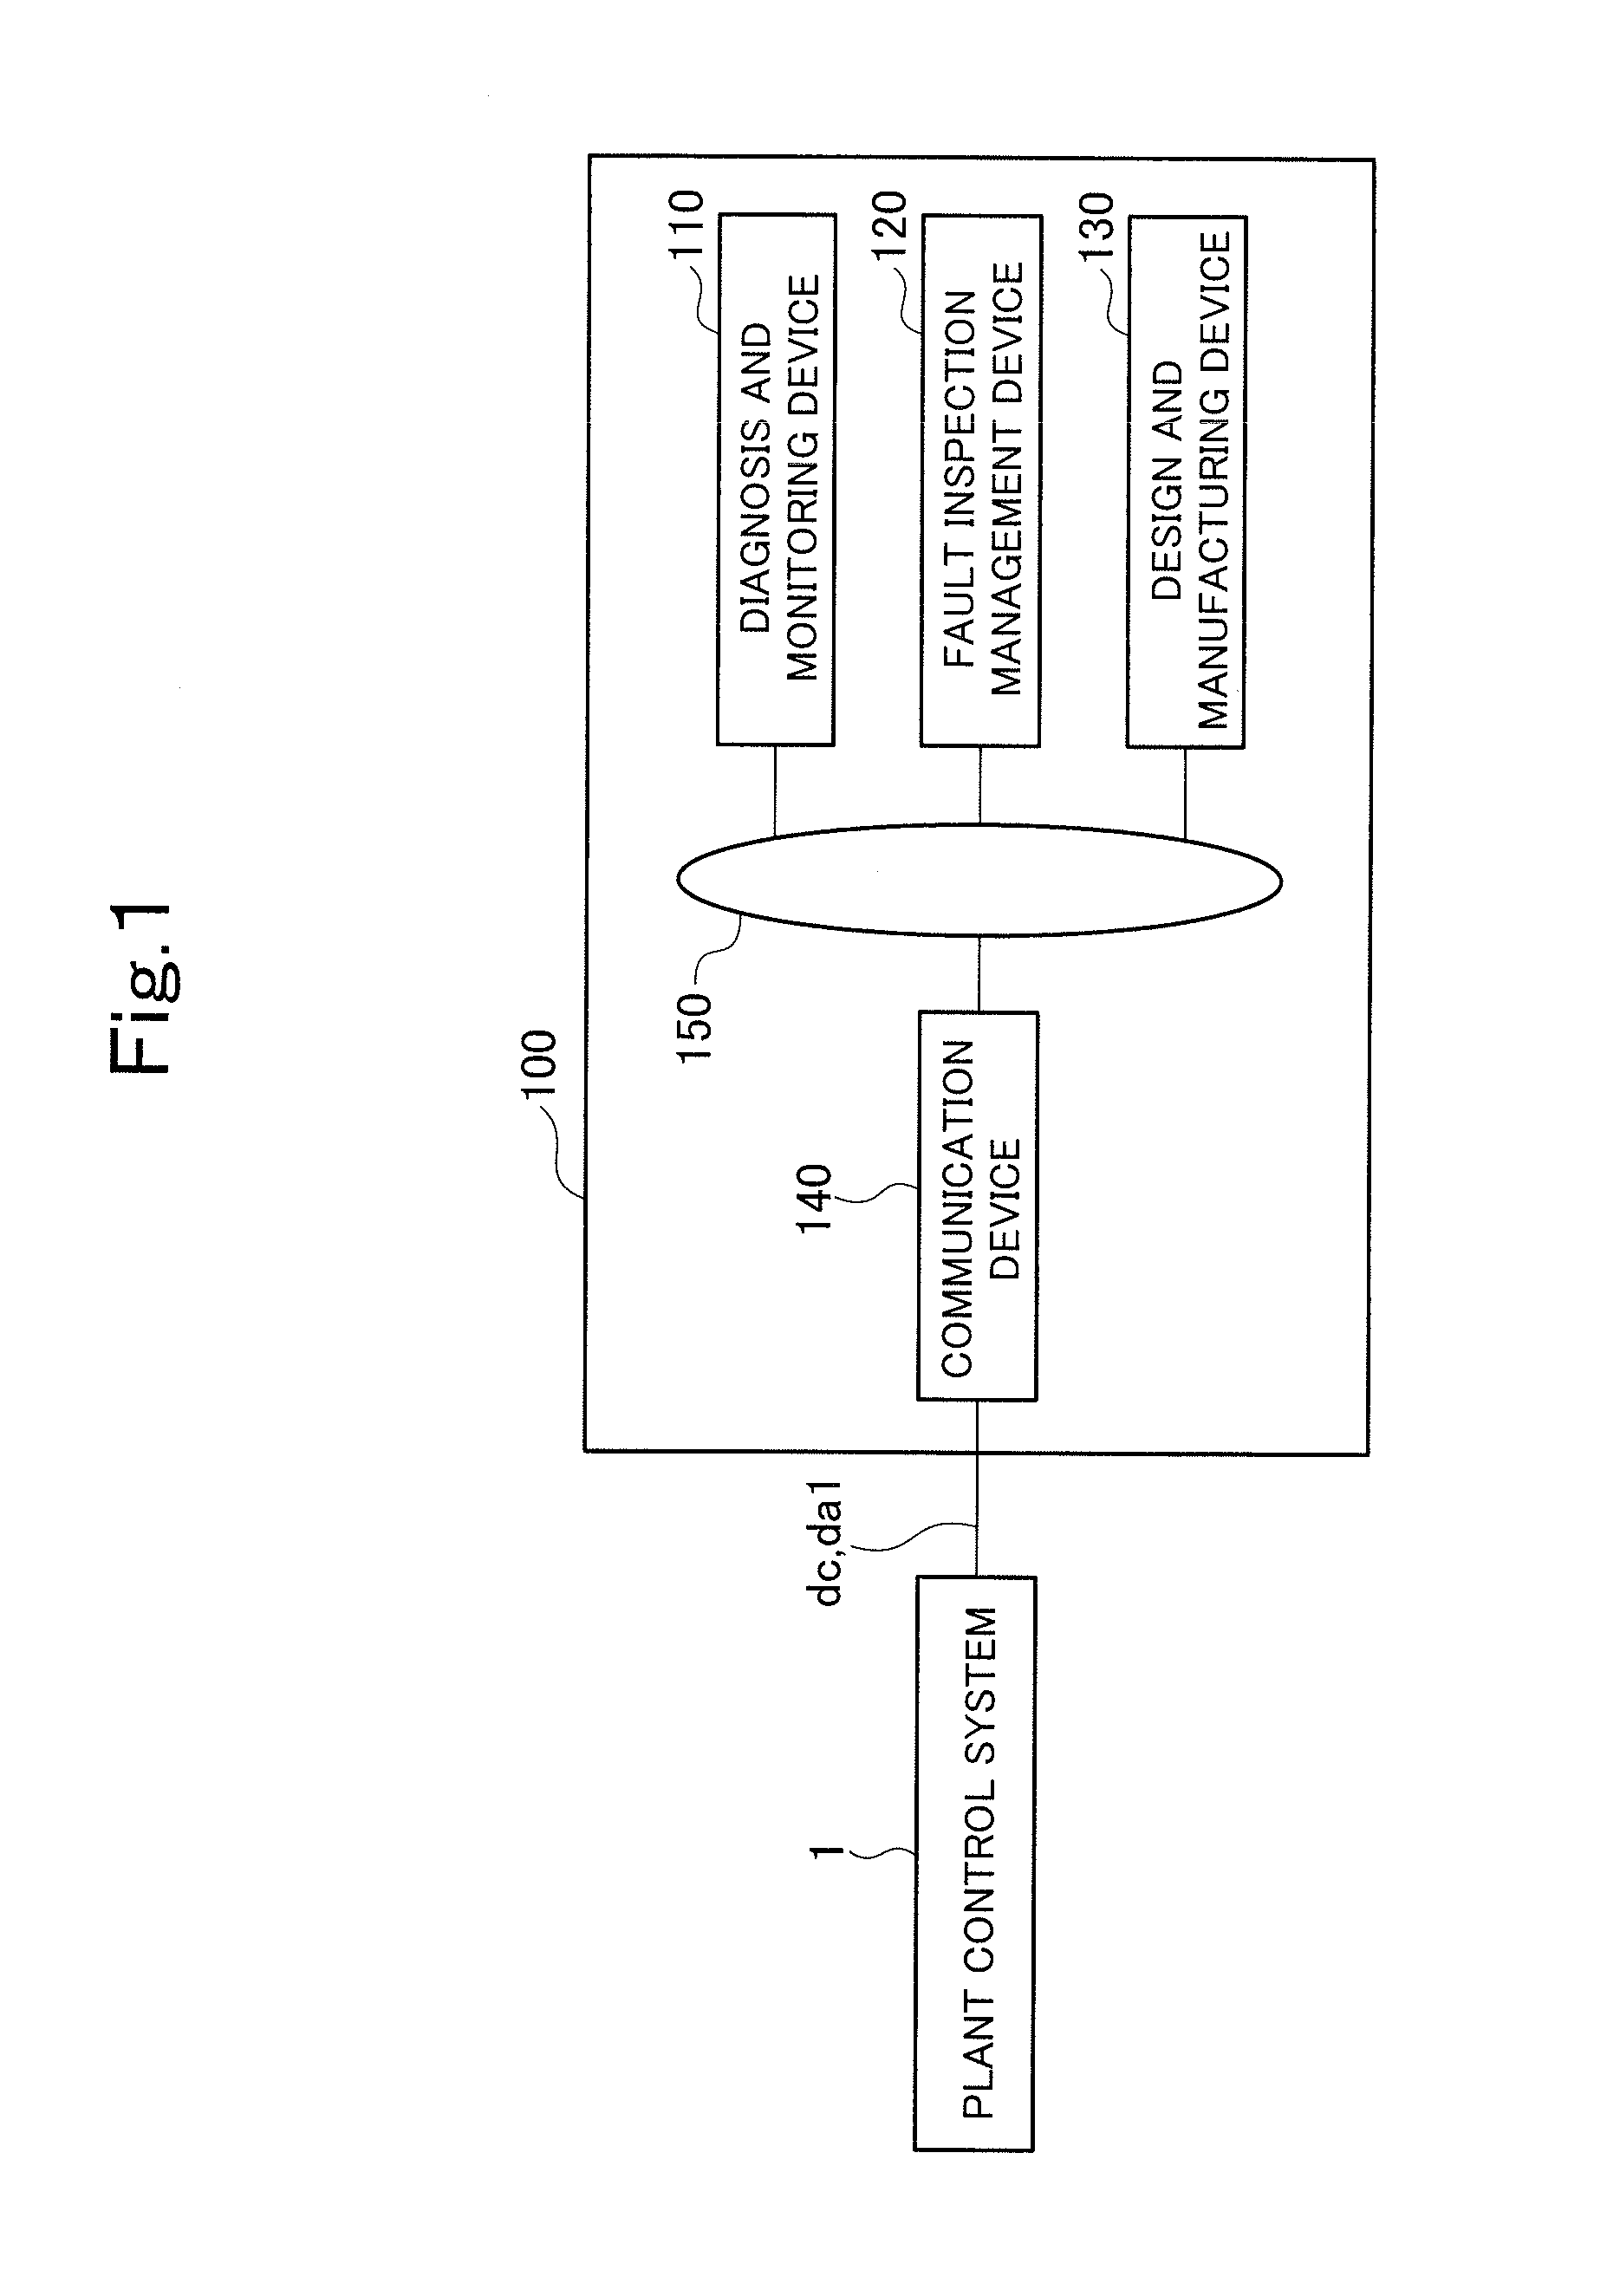 Plant safety design assistance device and plant monitoring and maintenance assistance device